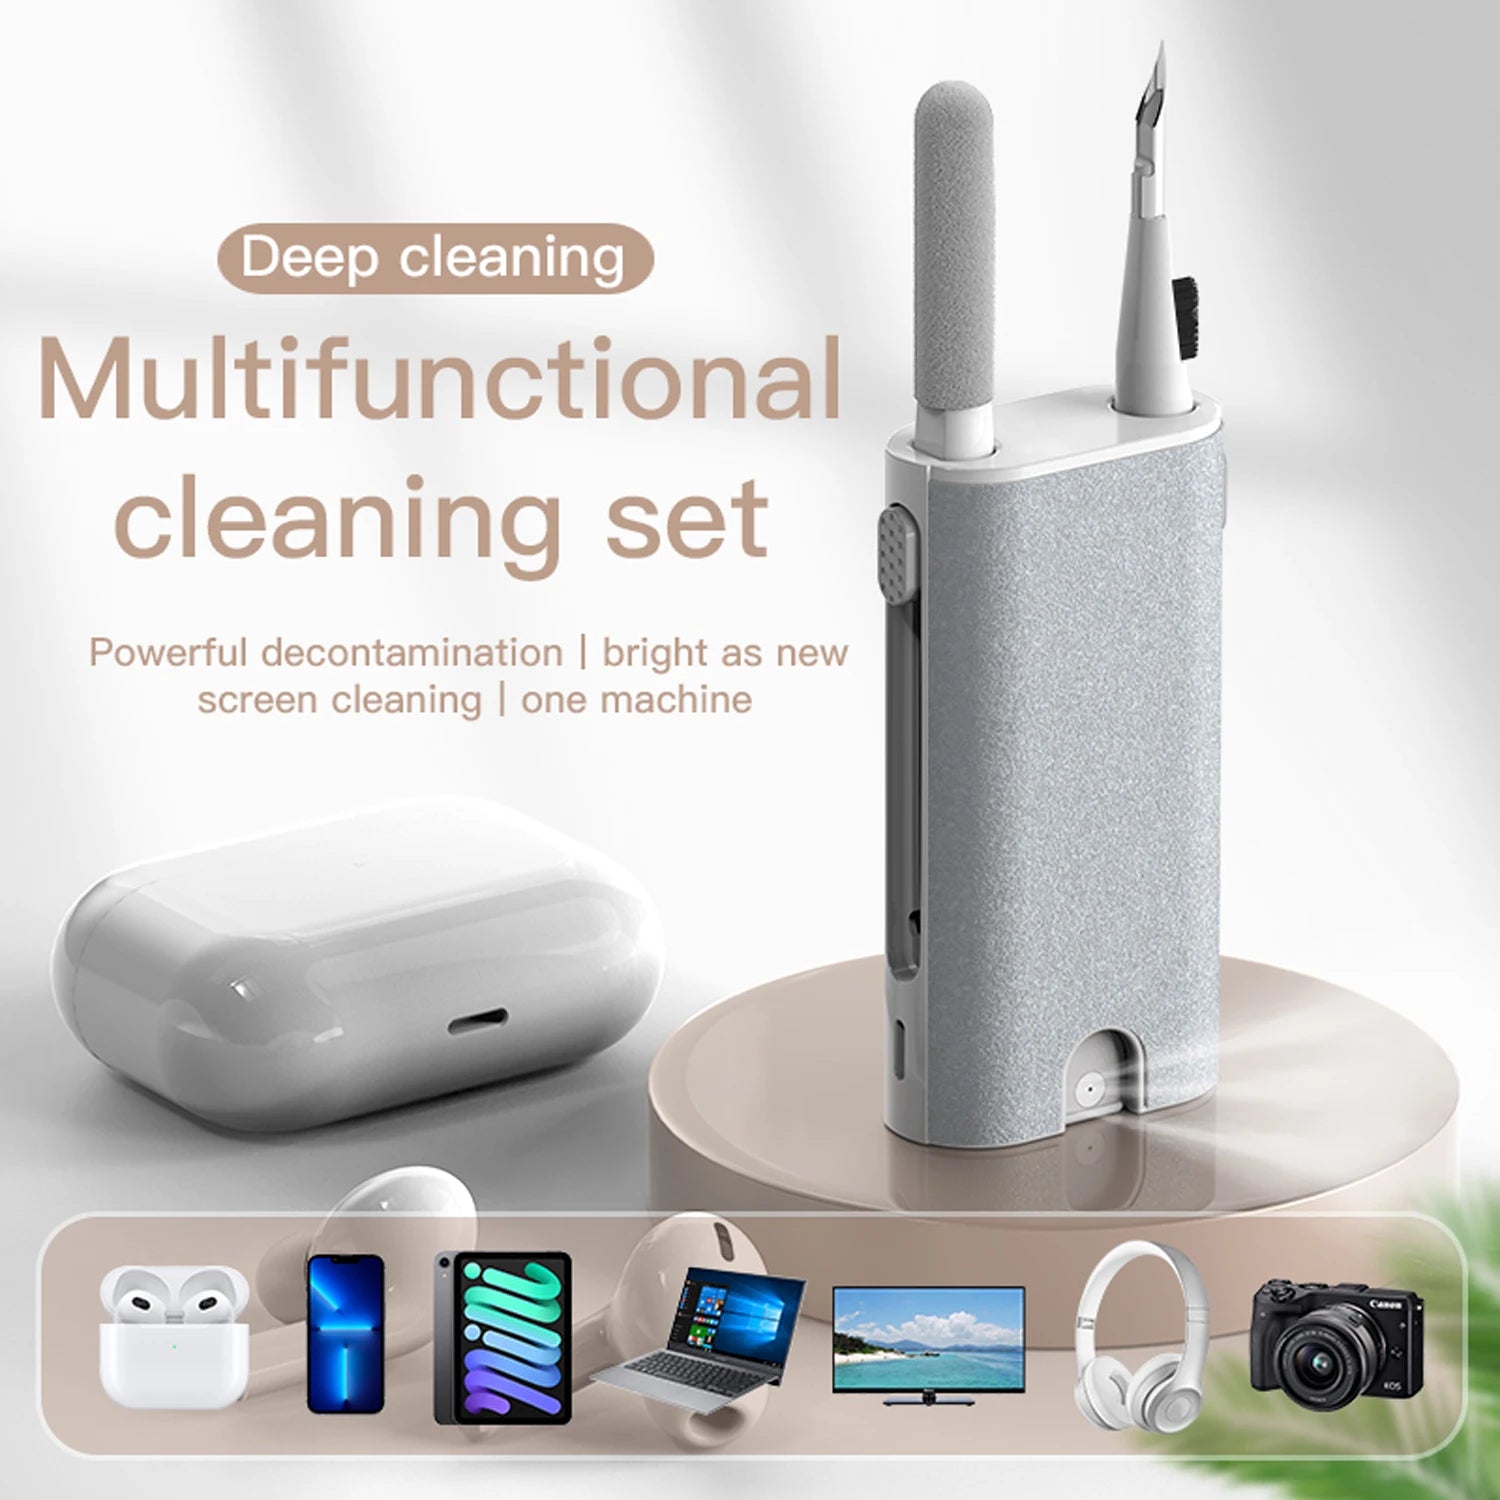 Earphone Cleaning Set Brushes for Apple iPhone, Camera, Laptop, and TV Screen | Premium Cleaning Tools for Headsets & AirPods